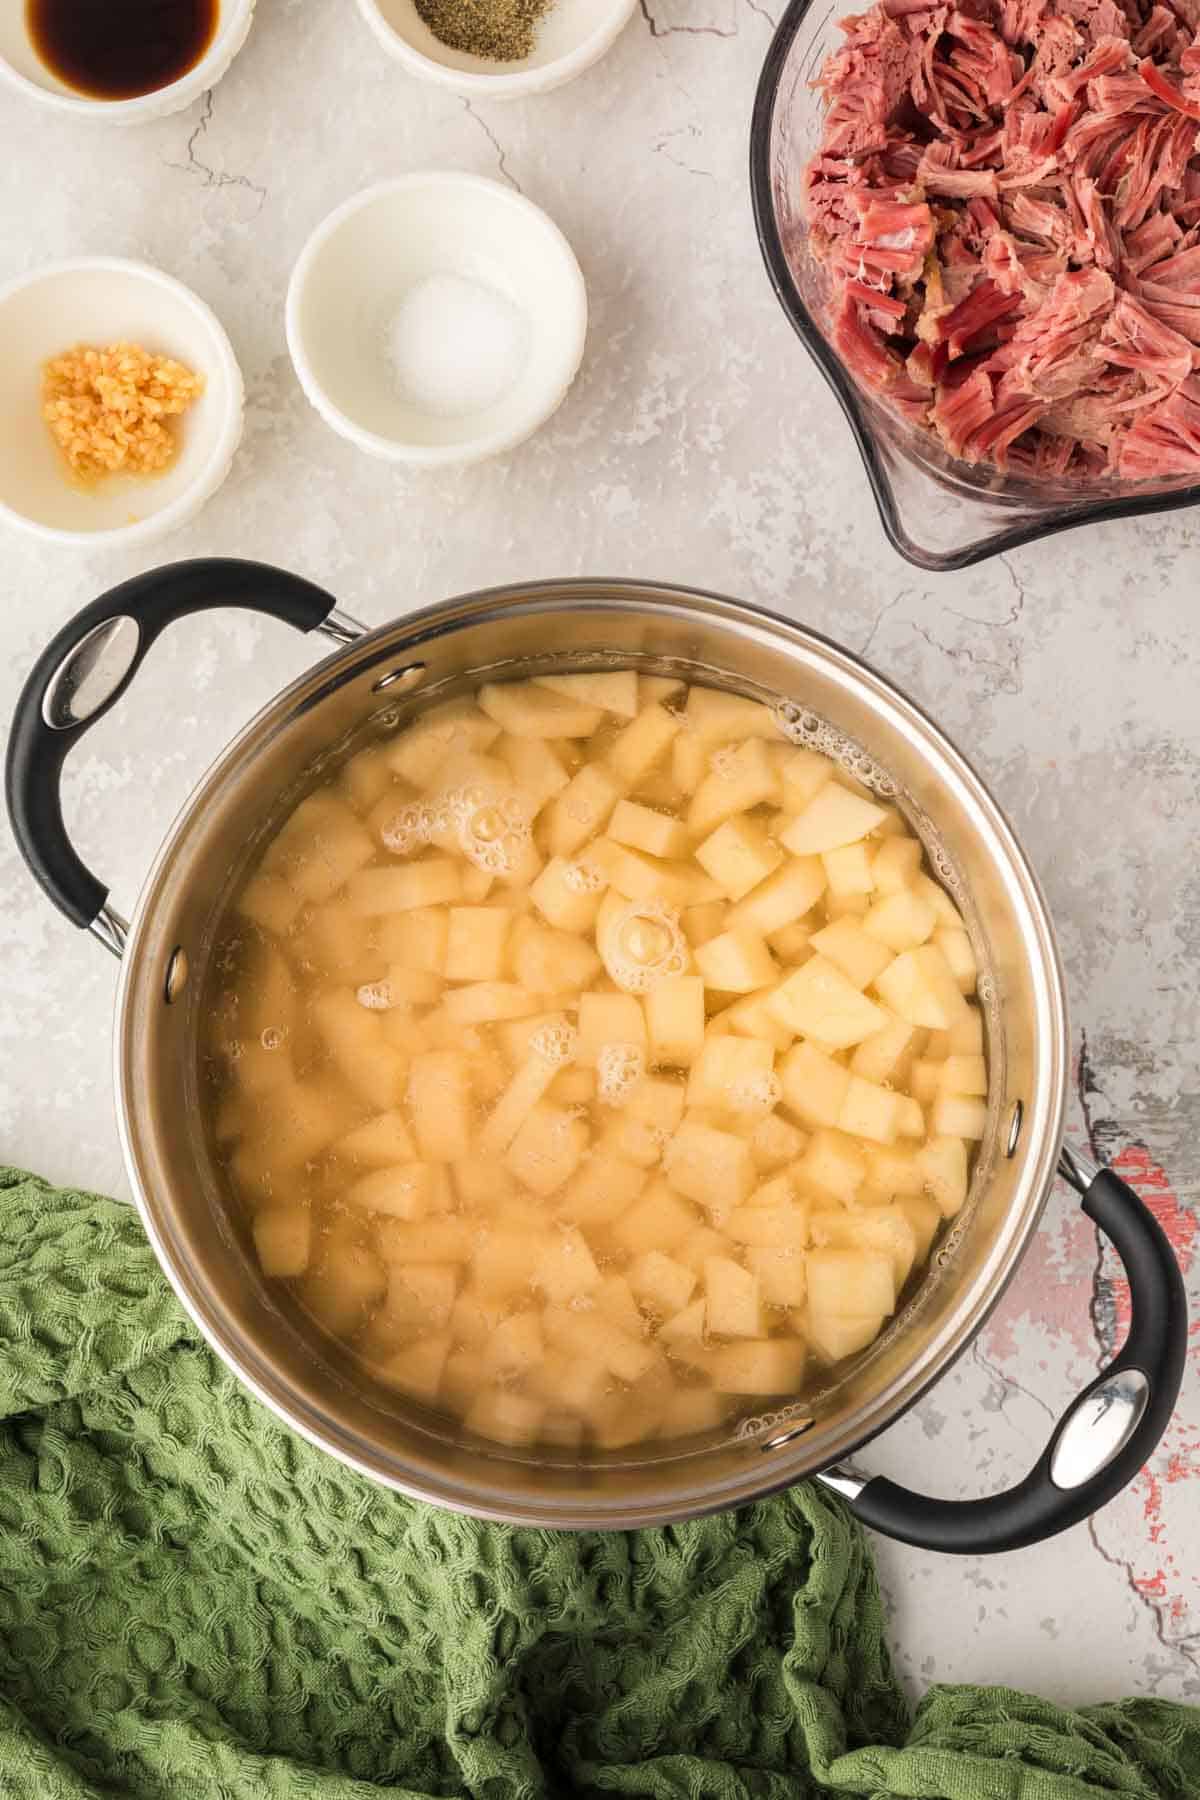 Boiling diced potatoes in a large pot